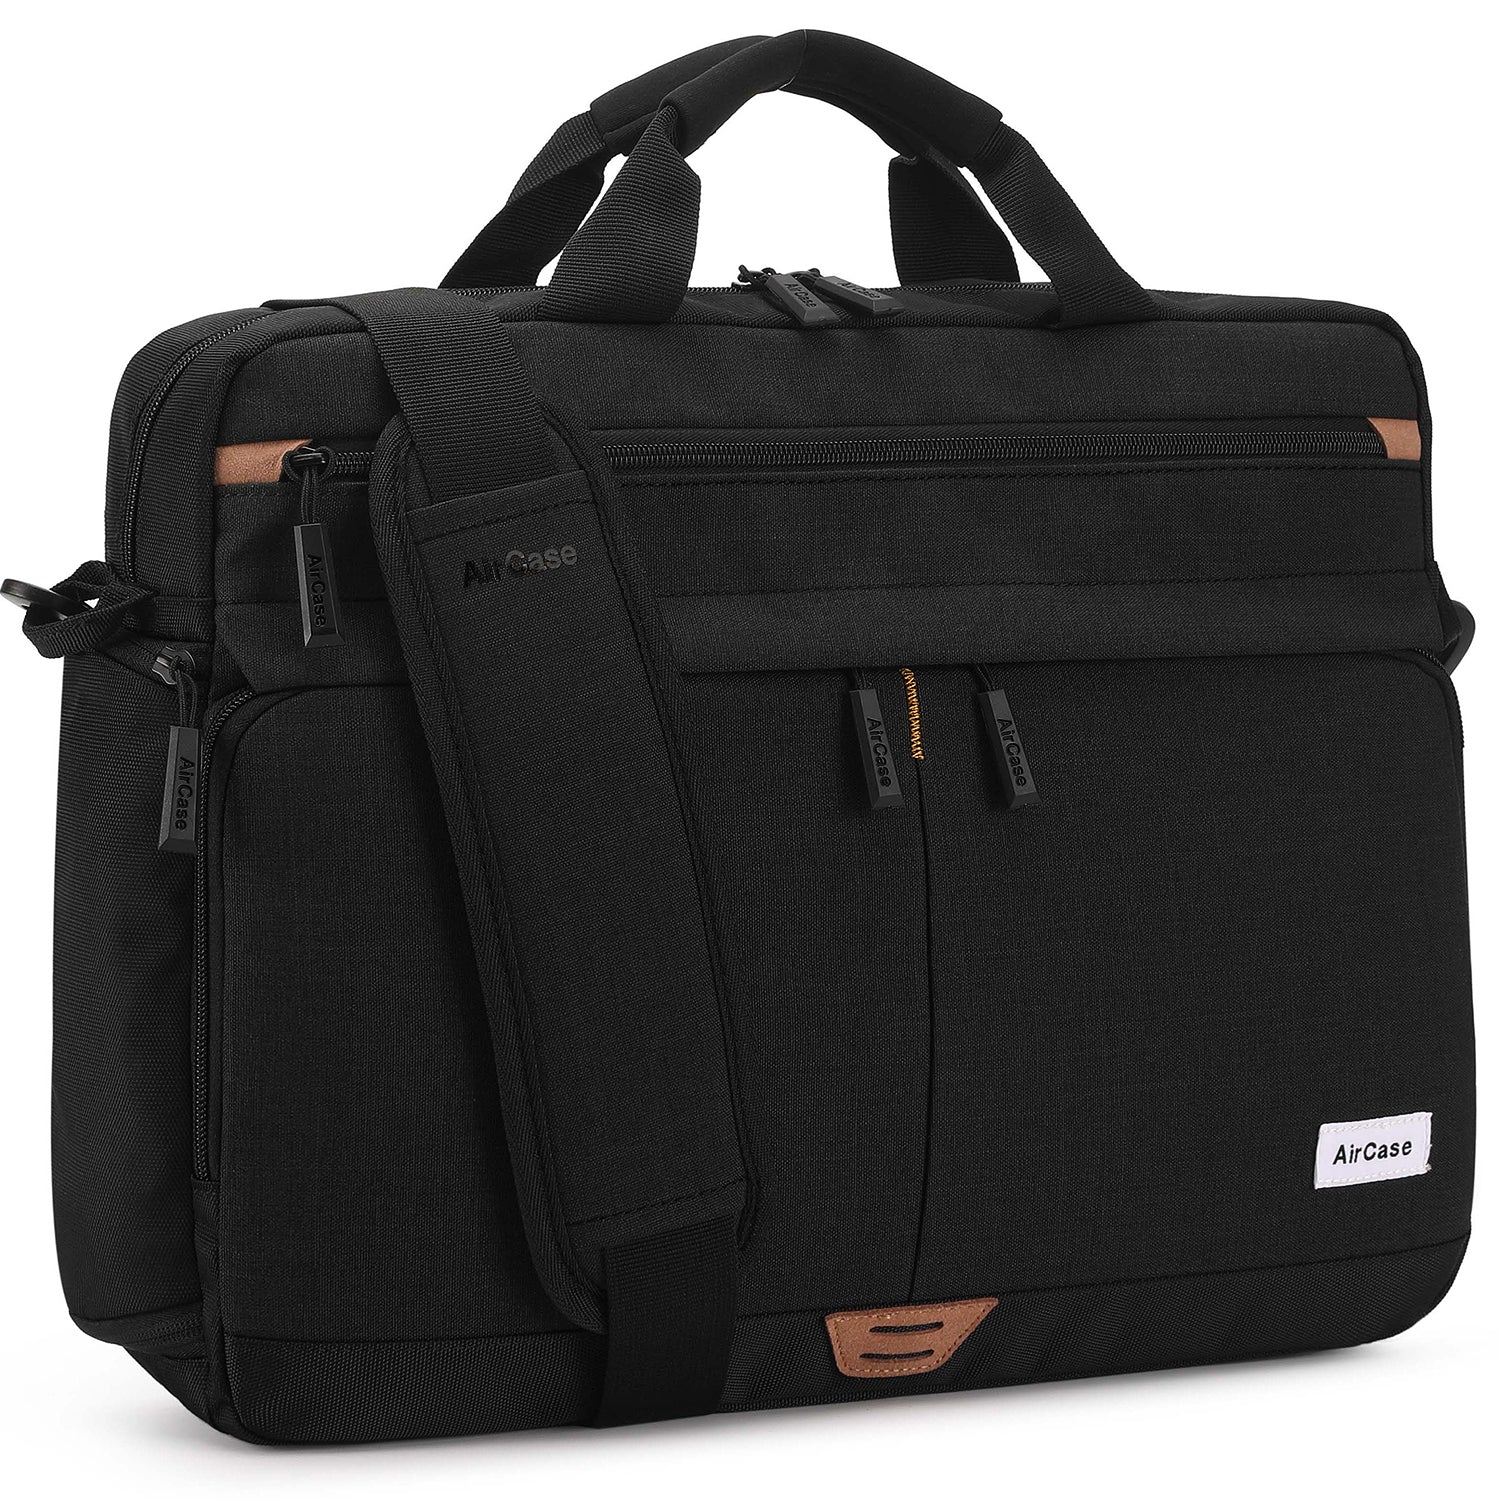 All the Space you need Briefcase Bag for upto 15.6" Laptop_13